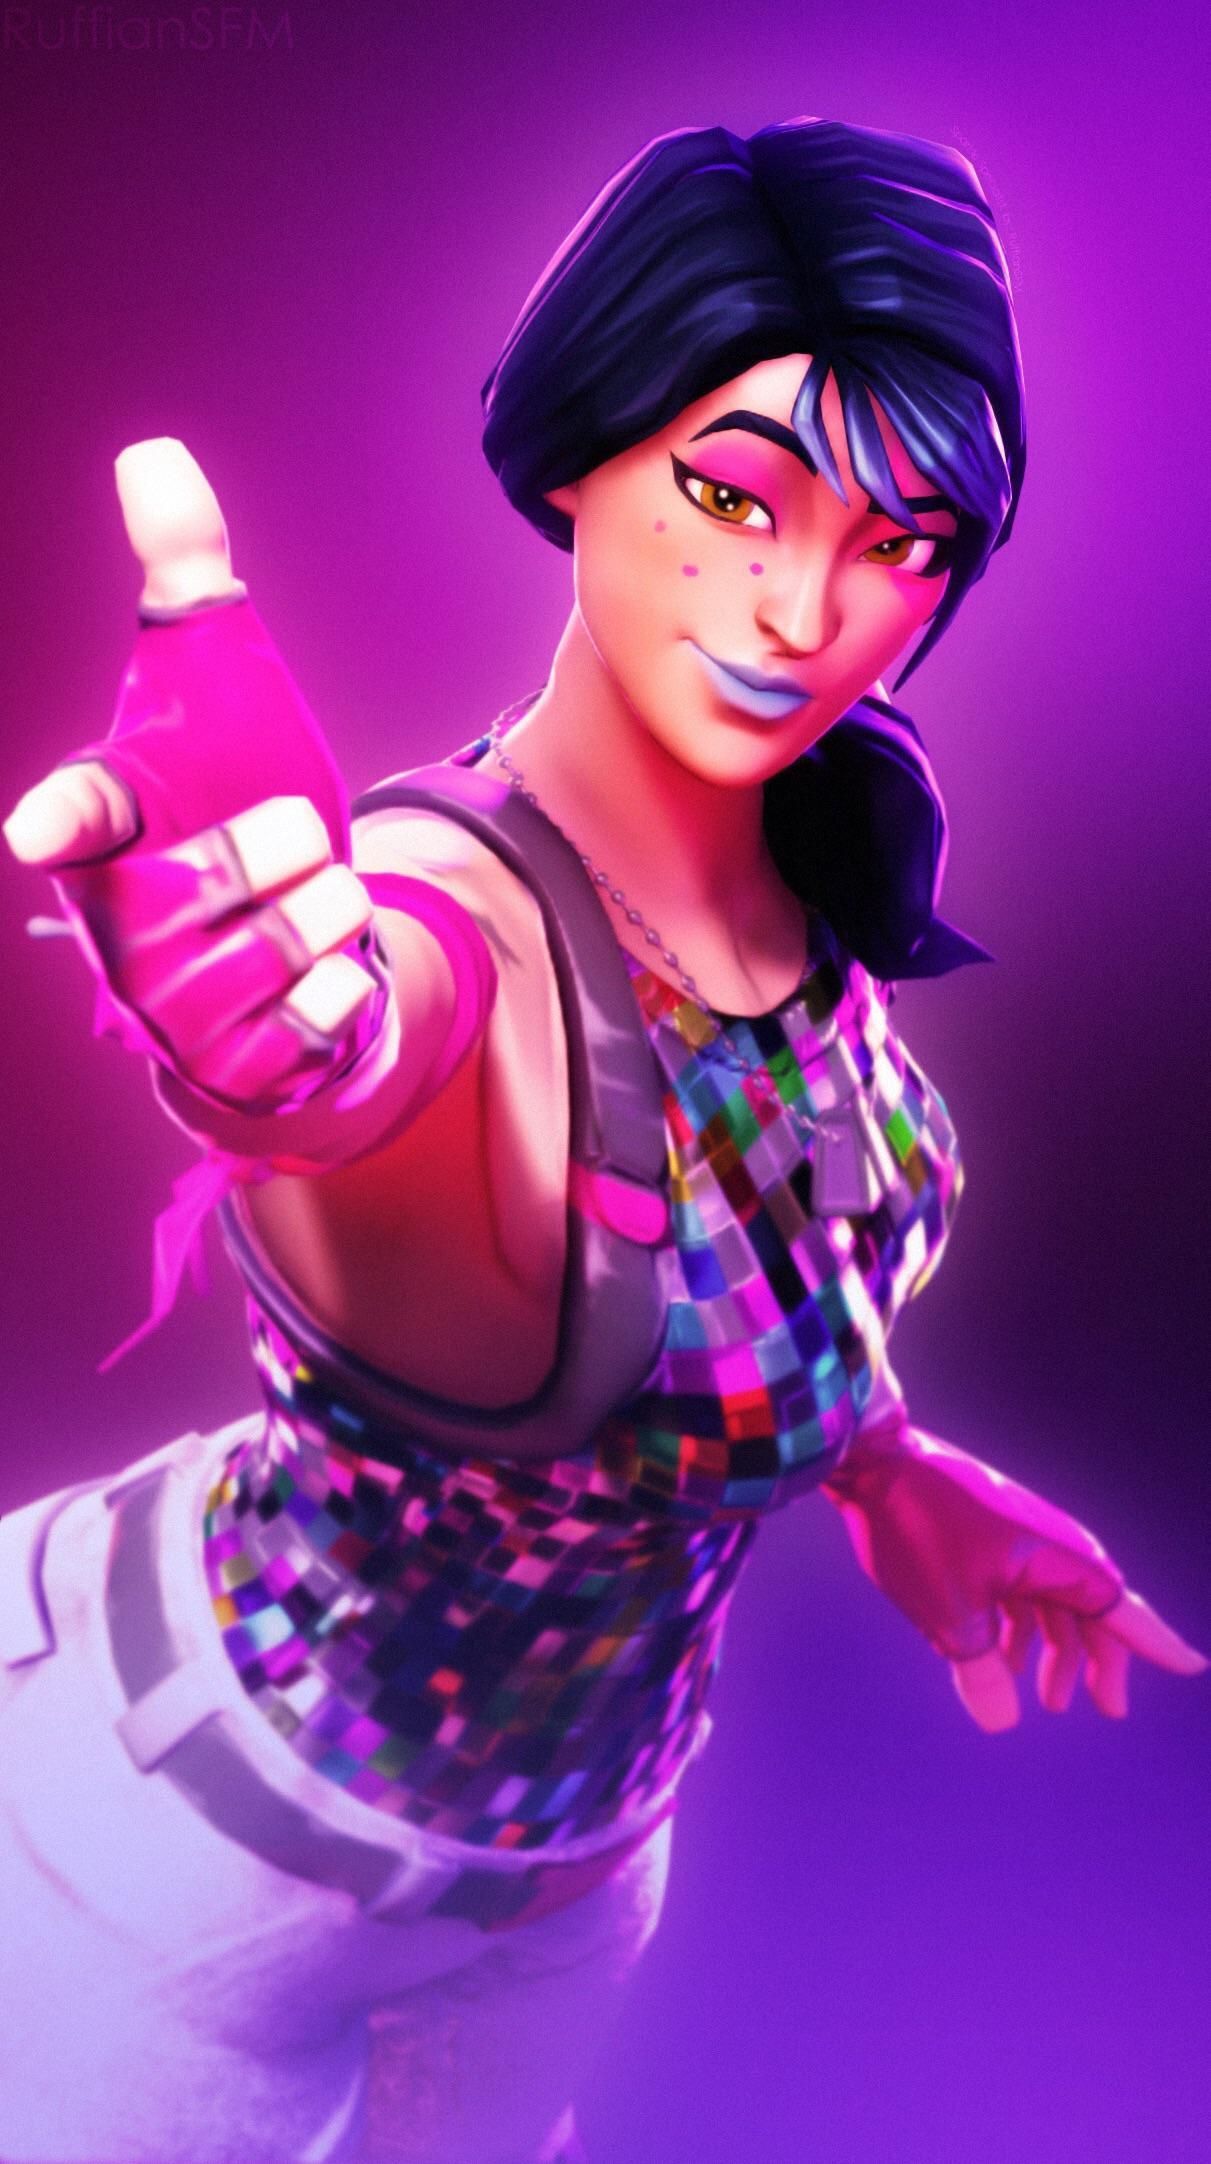 sparkle specialist from fortnite! like and follow me❤. Best